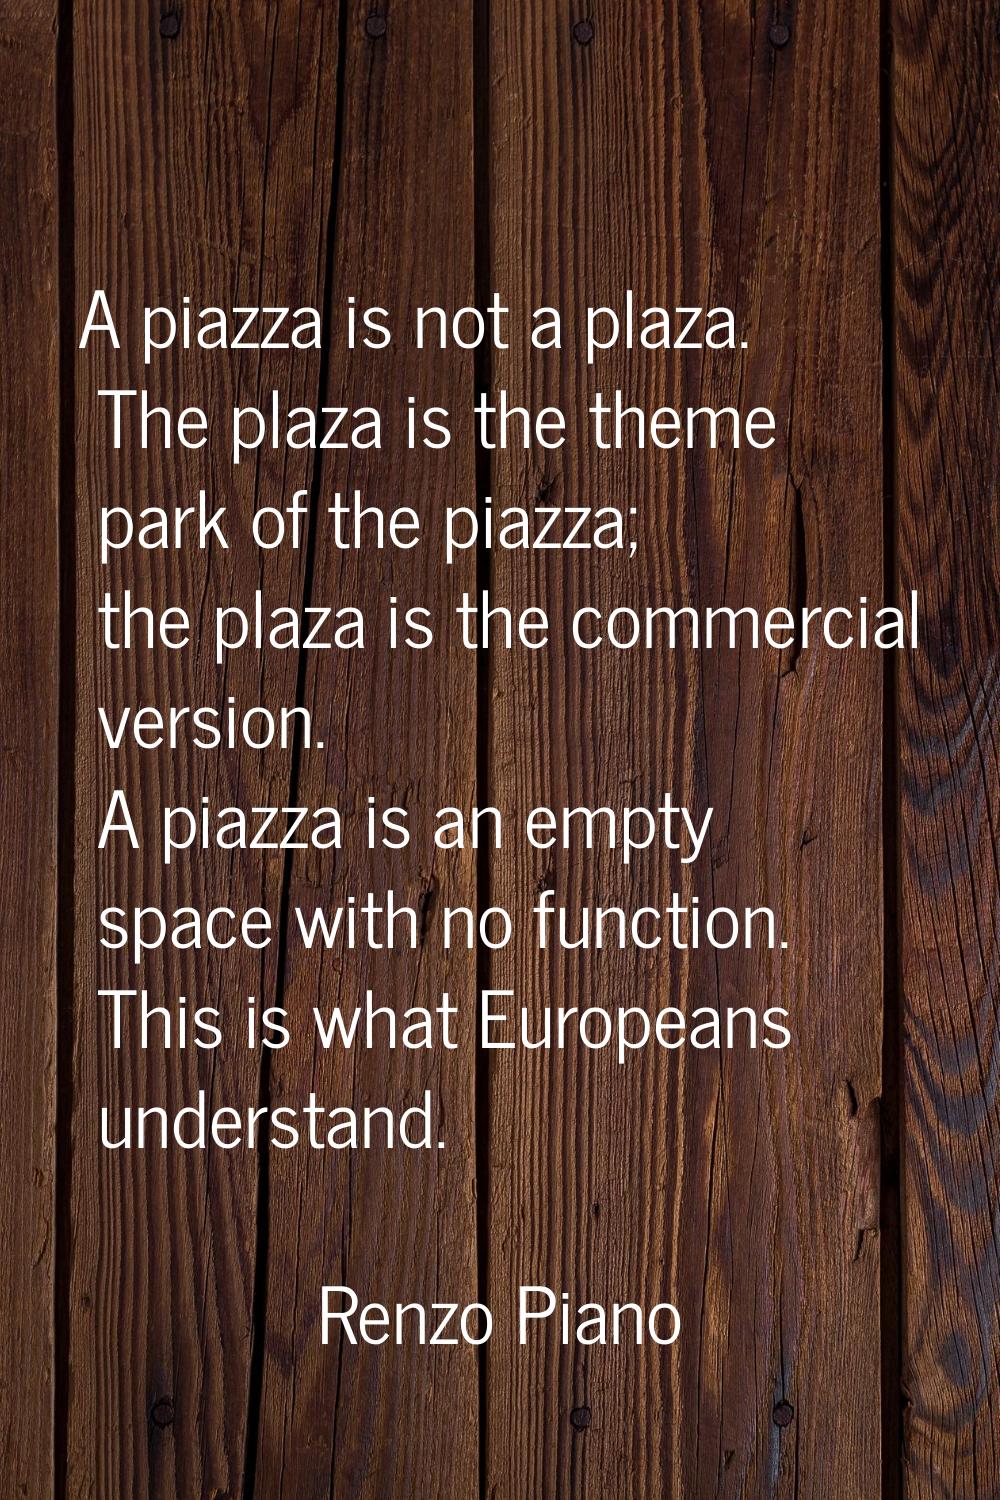 A piazza is not a plaza. The plaza is the theme park of the piazza; the plaza is the commercial ver